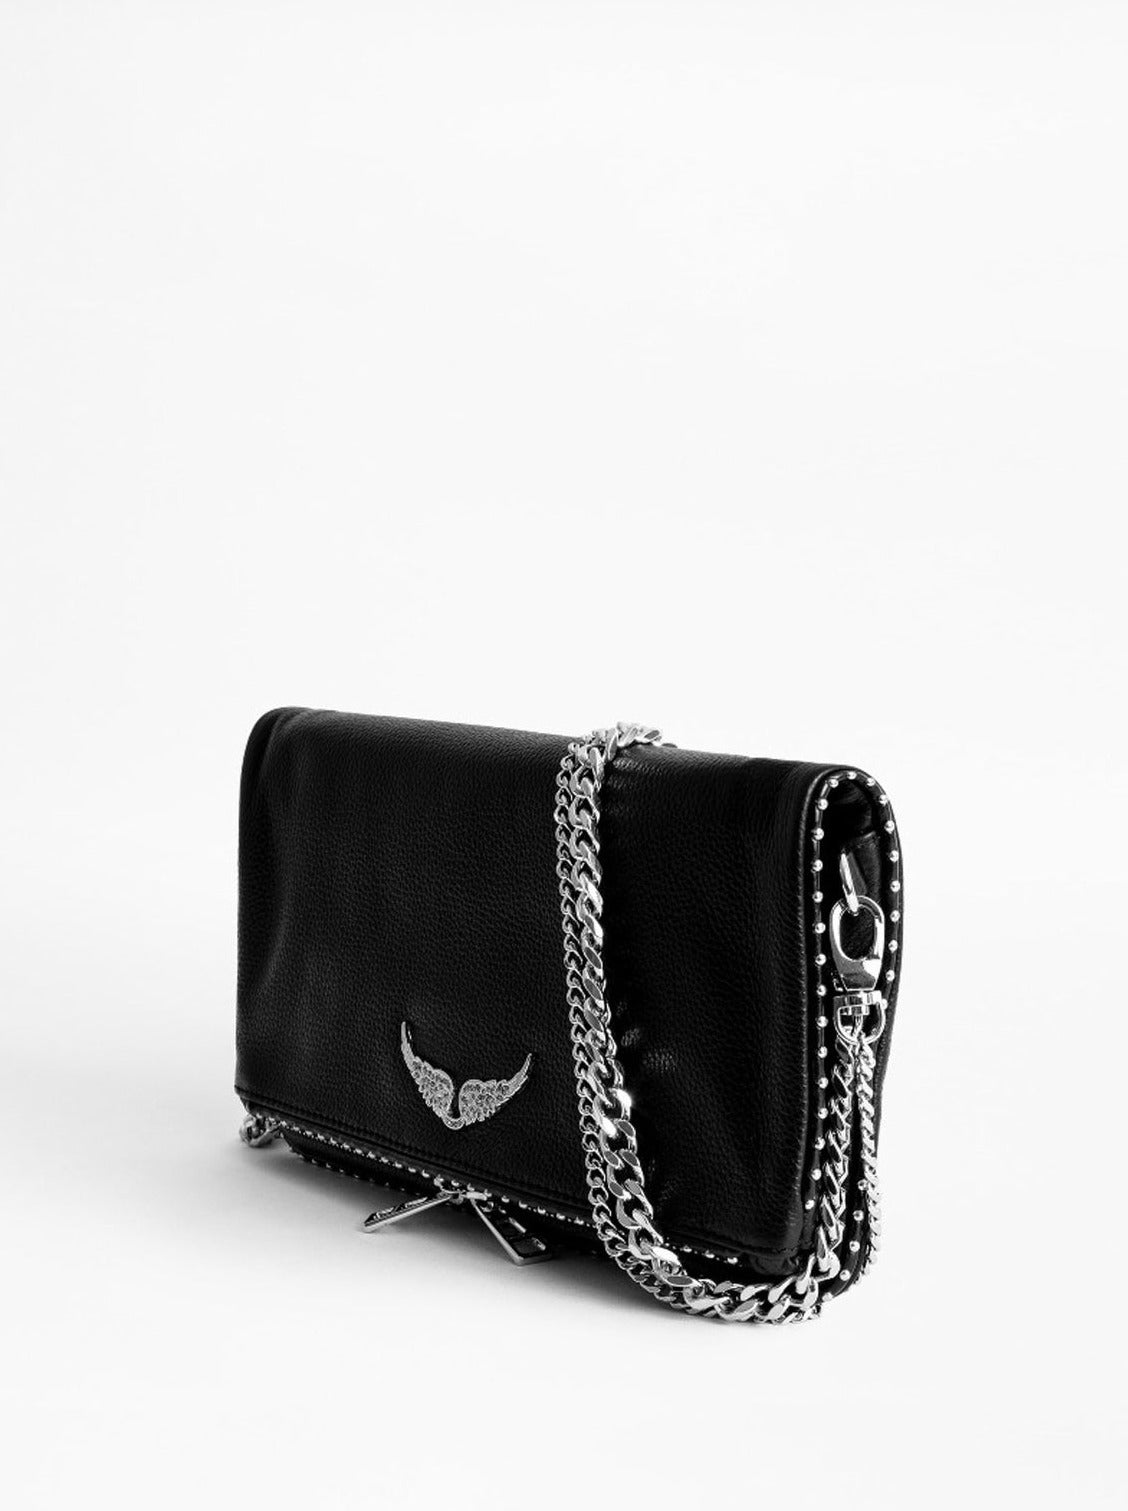 Rock grained leather studs bag, black-silver